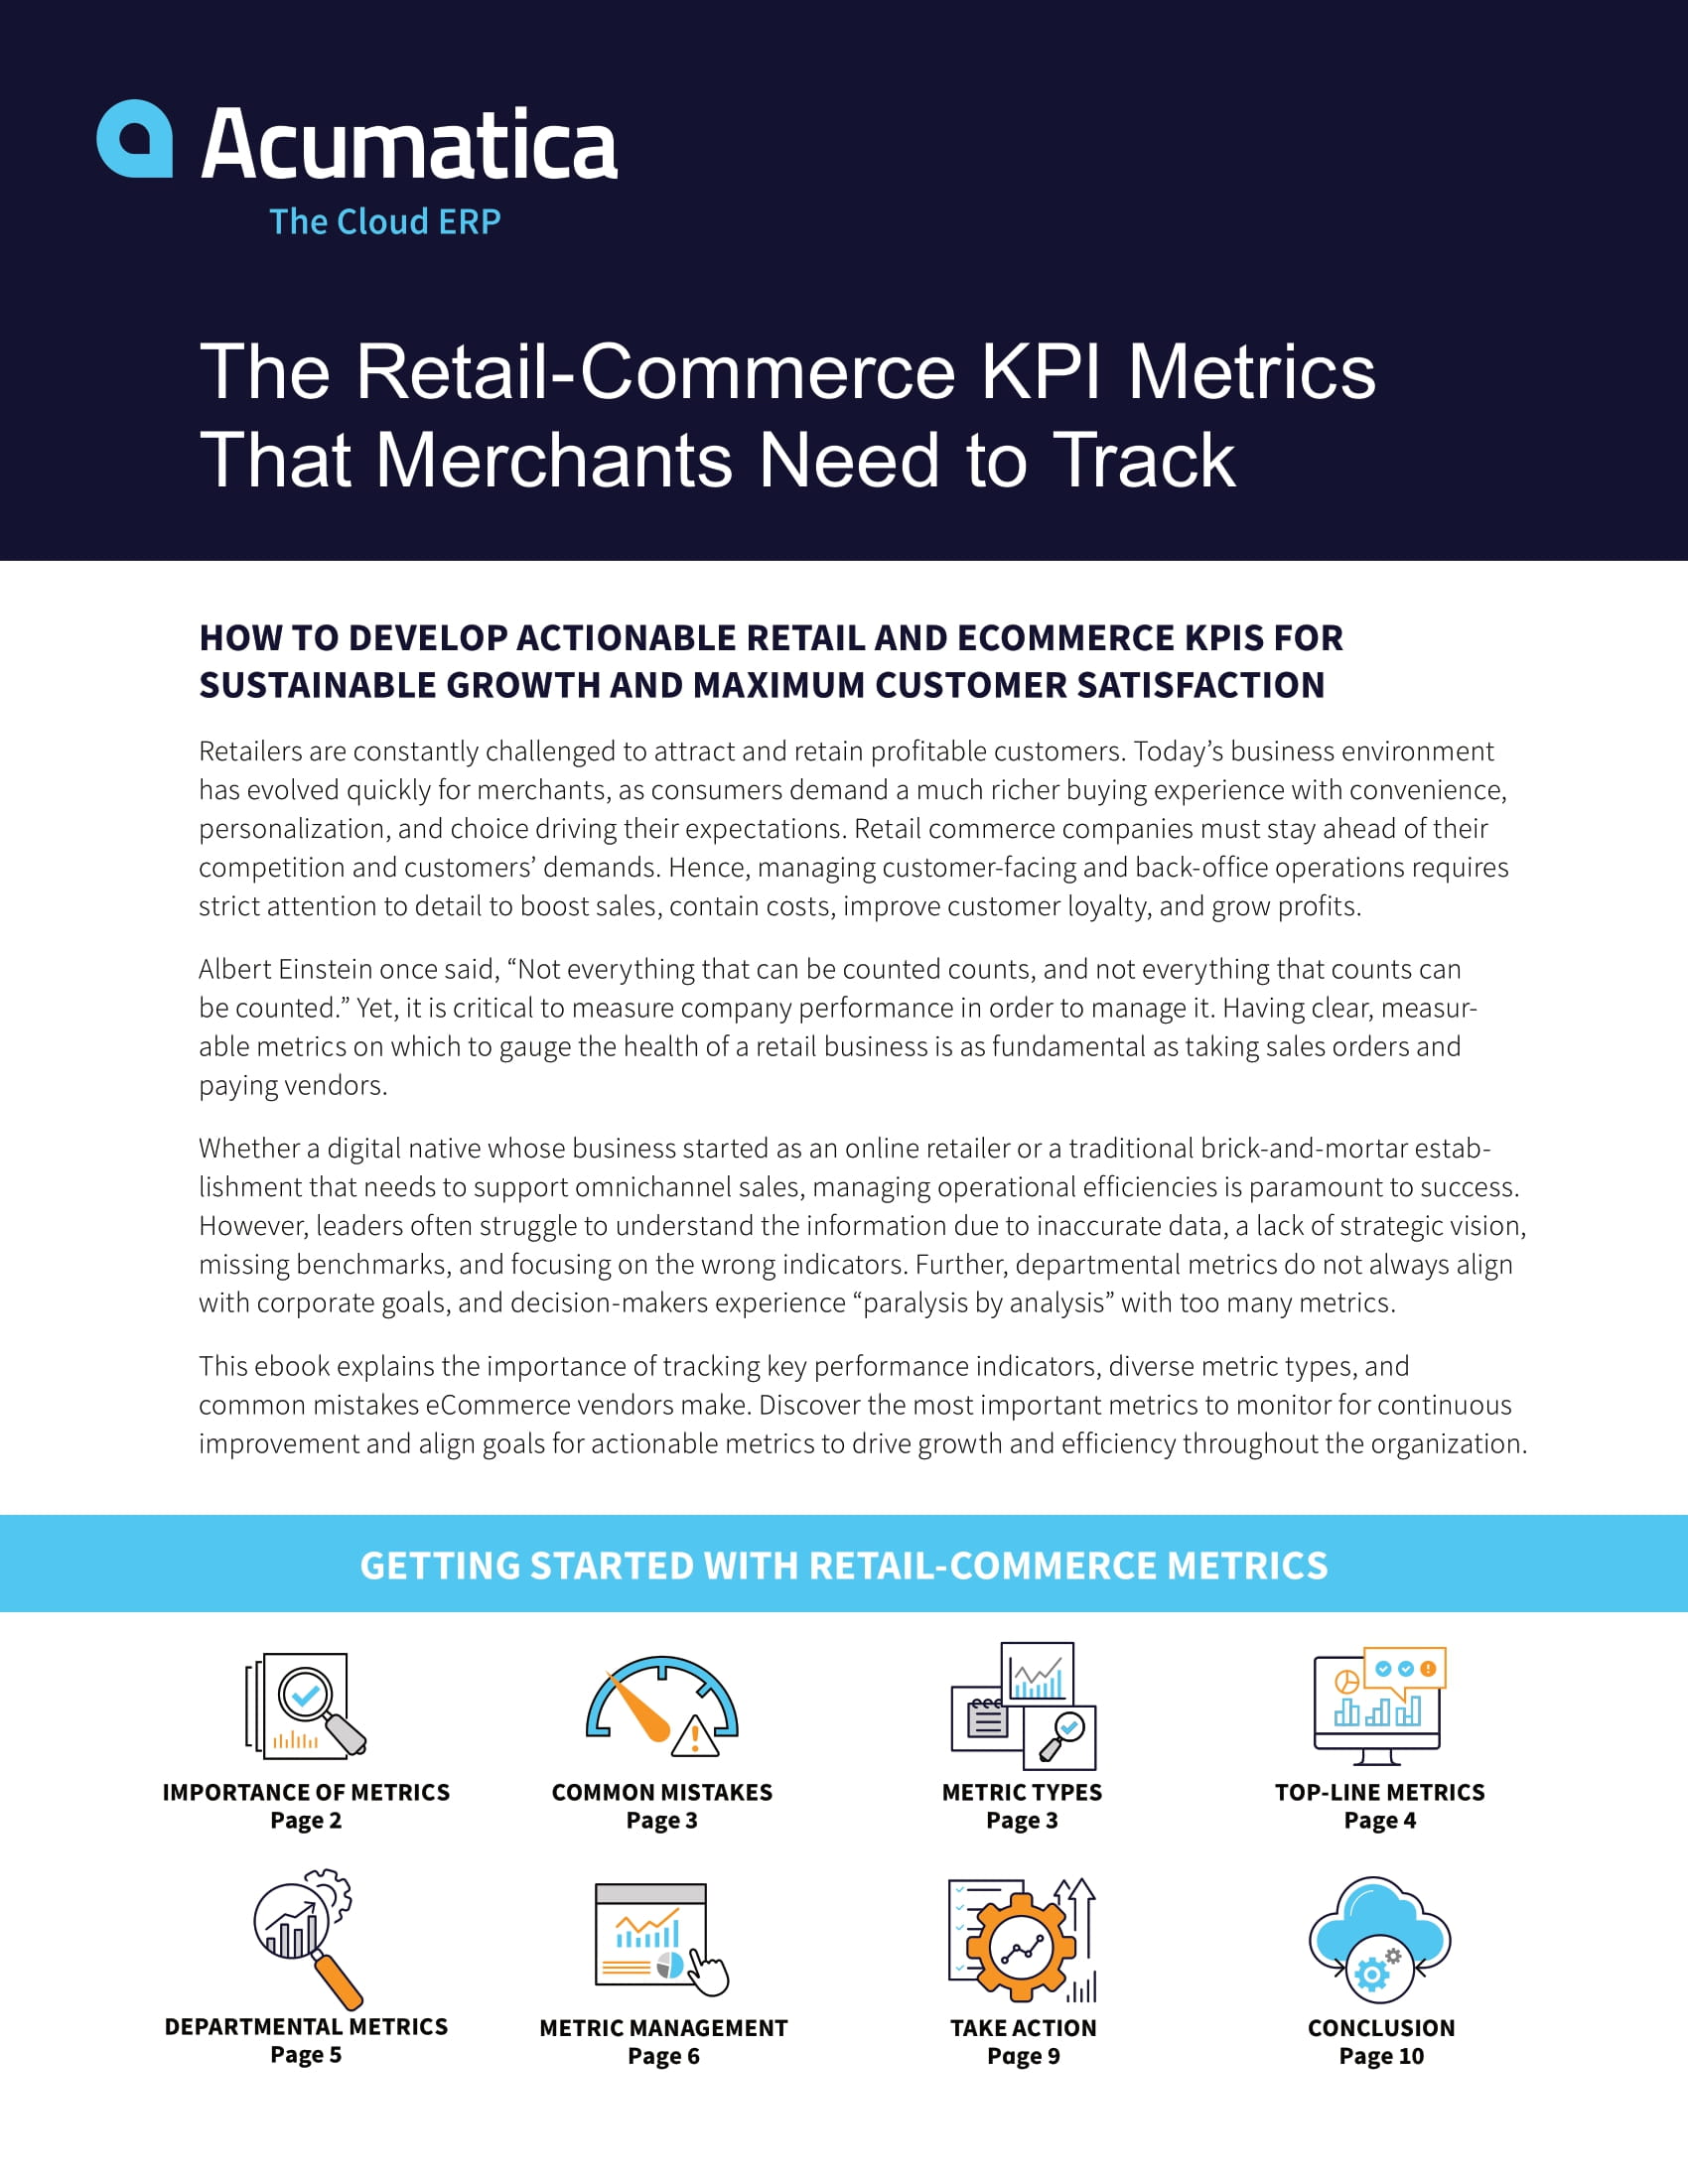 Manage Company Performance Through the Right Retail-Commerce KPIs, page 0